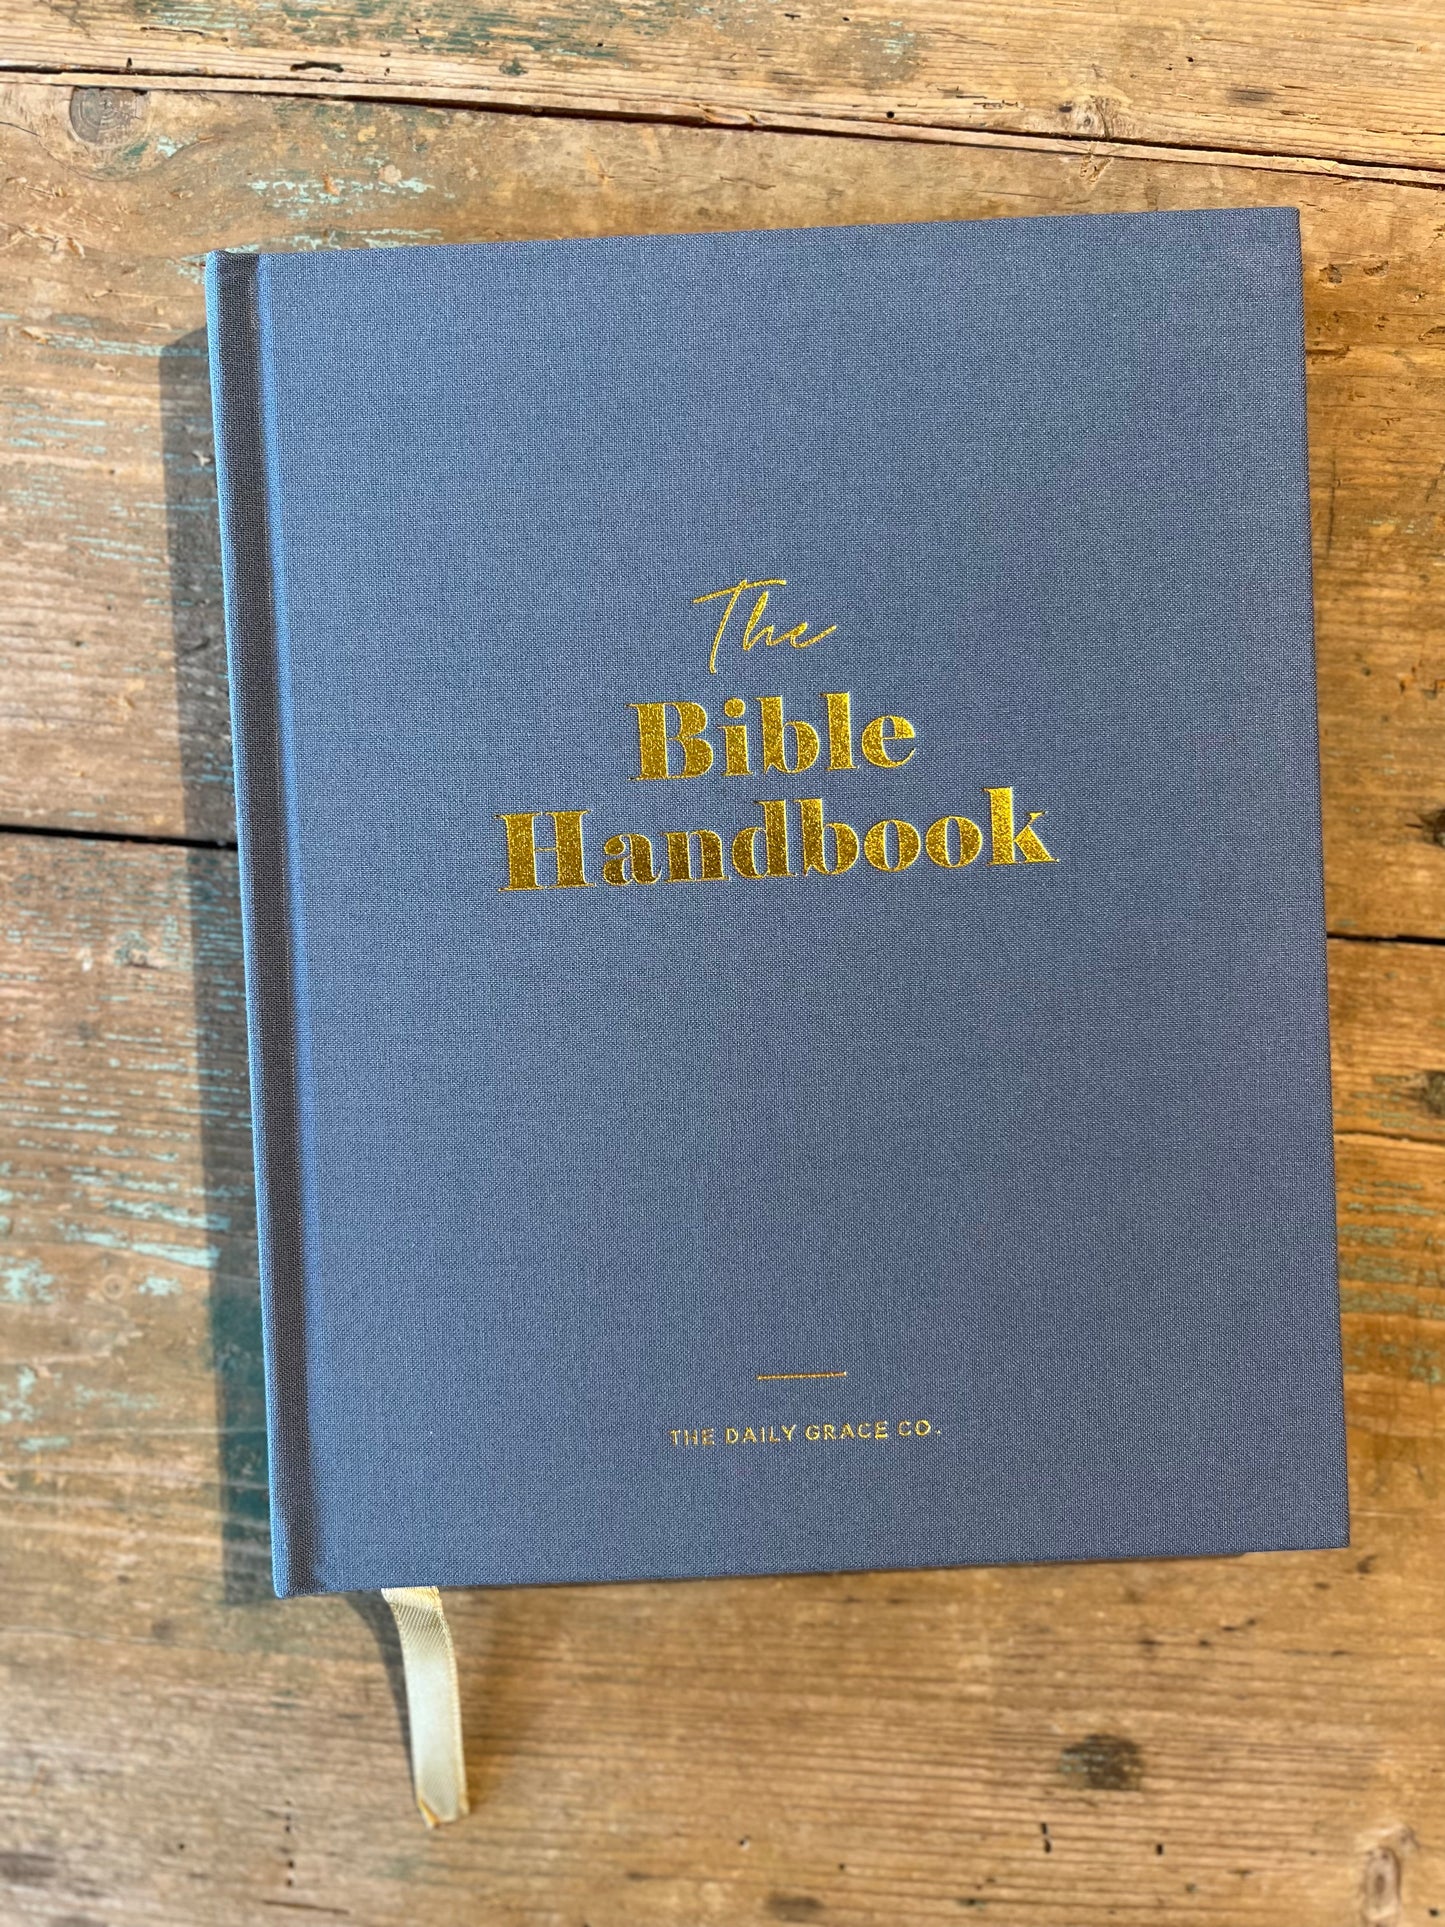 The Bible Handbook- Reference Book